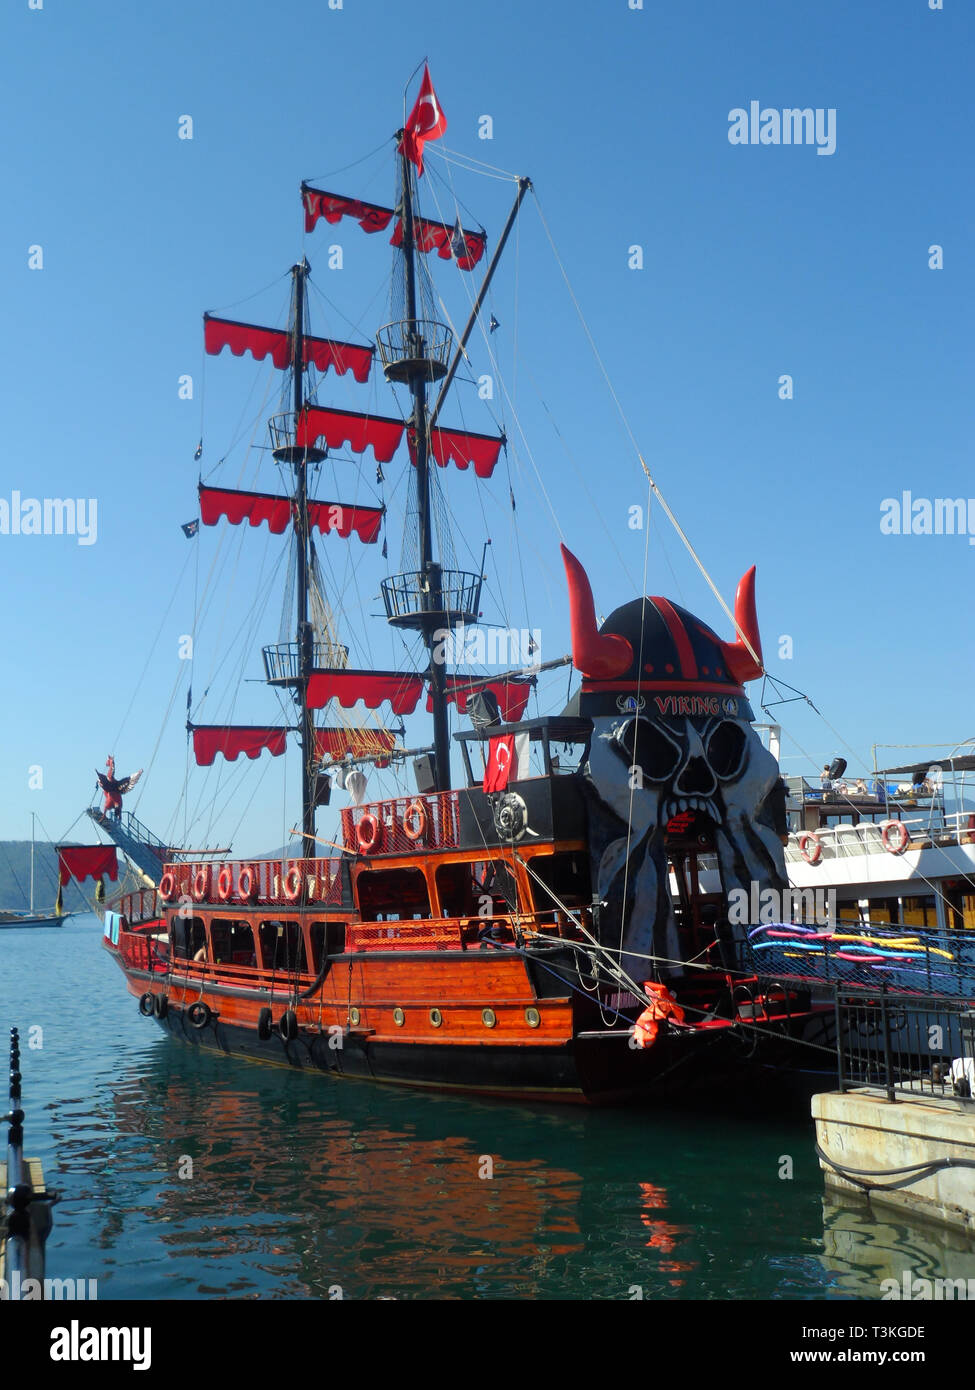 A Turkish gulet decked out as a pirate ship for tourist day trips, Marmaris, Turkey Stock Photo